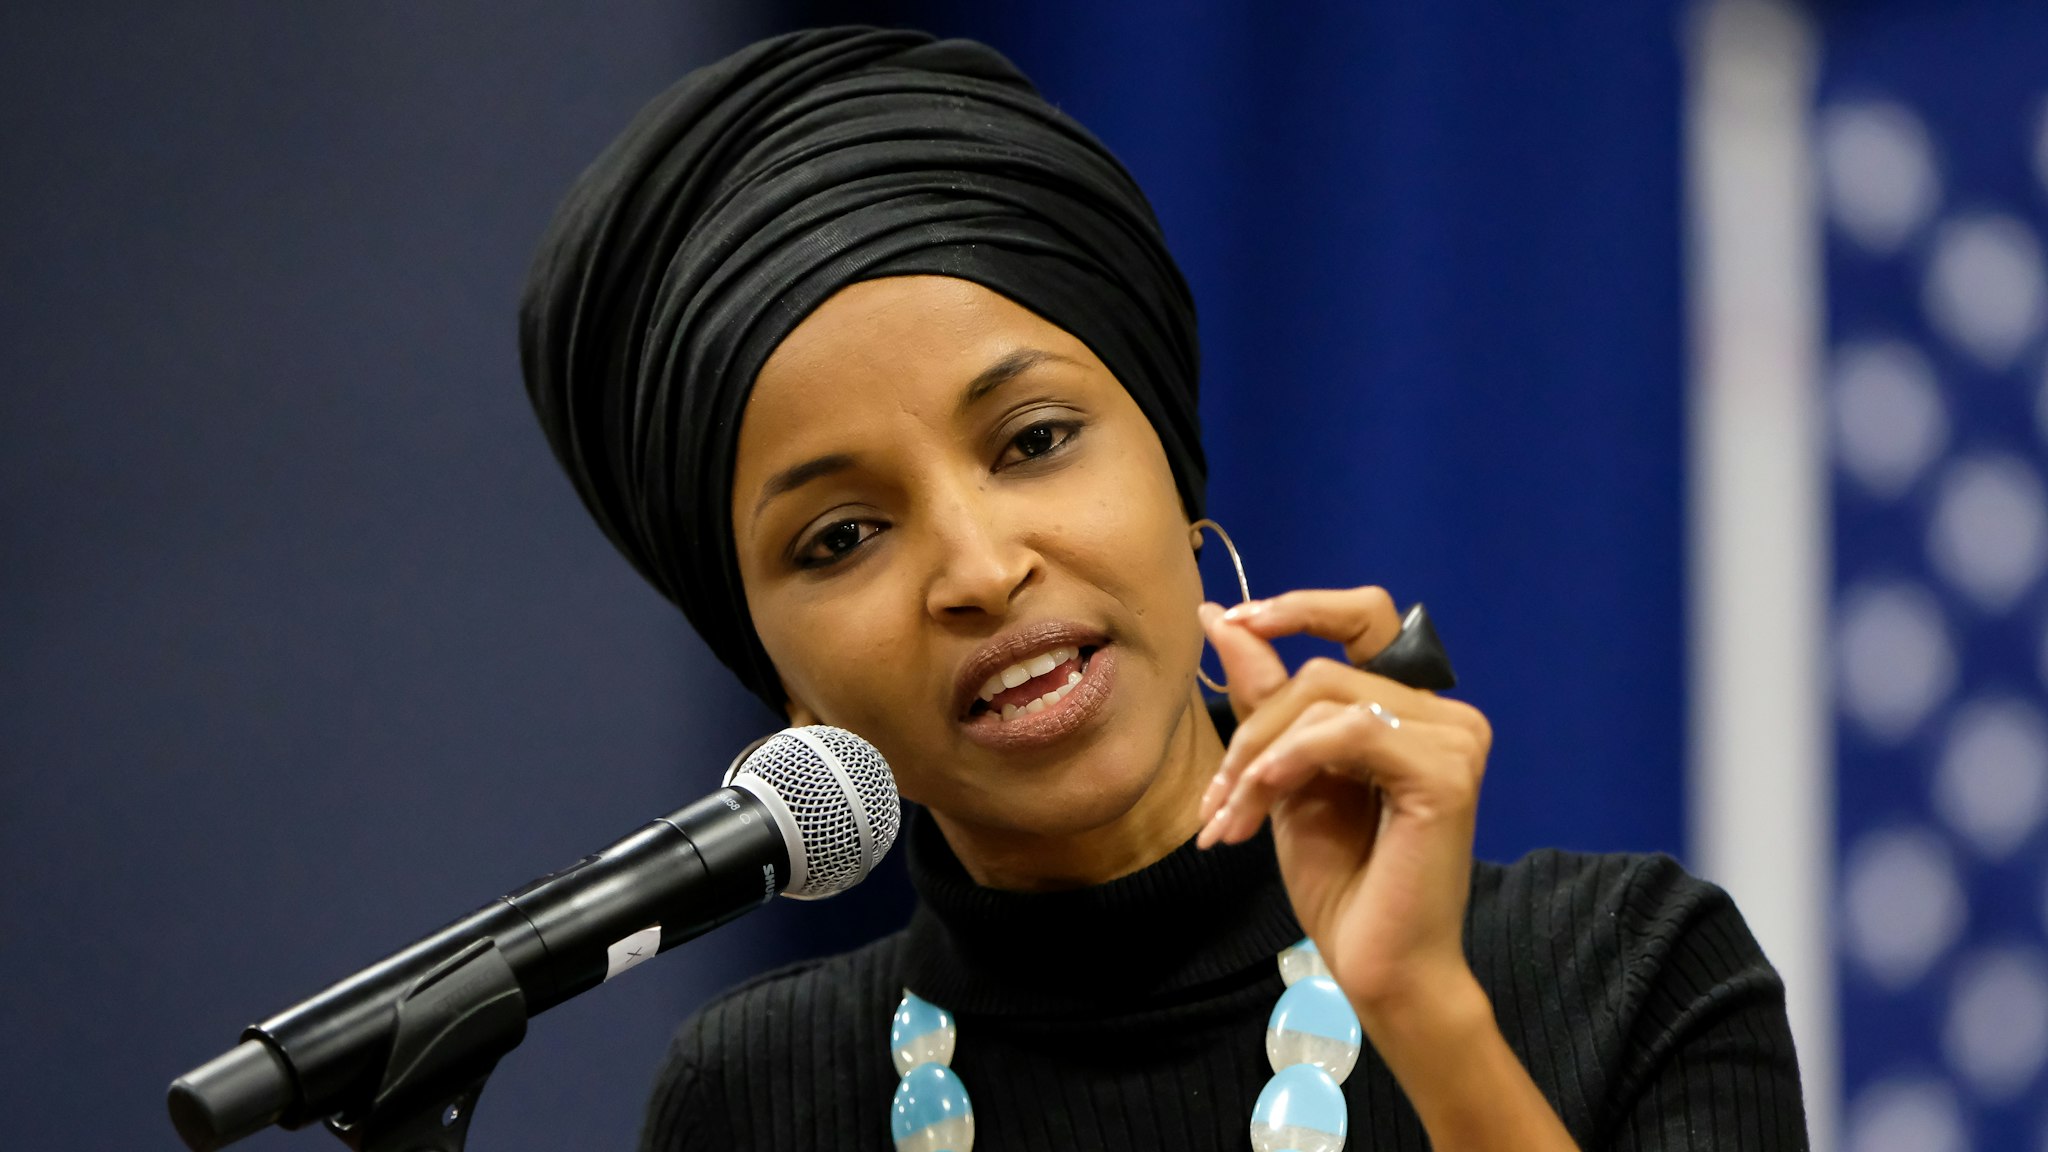 MANCHESTER, UNITED STATES - 2019/12/13: Minnesota Congresswoman Ilhan Omar campaigns with Vermont Senator and presidential candidate Bernie Sanders at Southern New Hampshire University in Manchester.